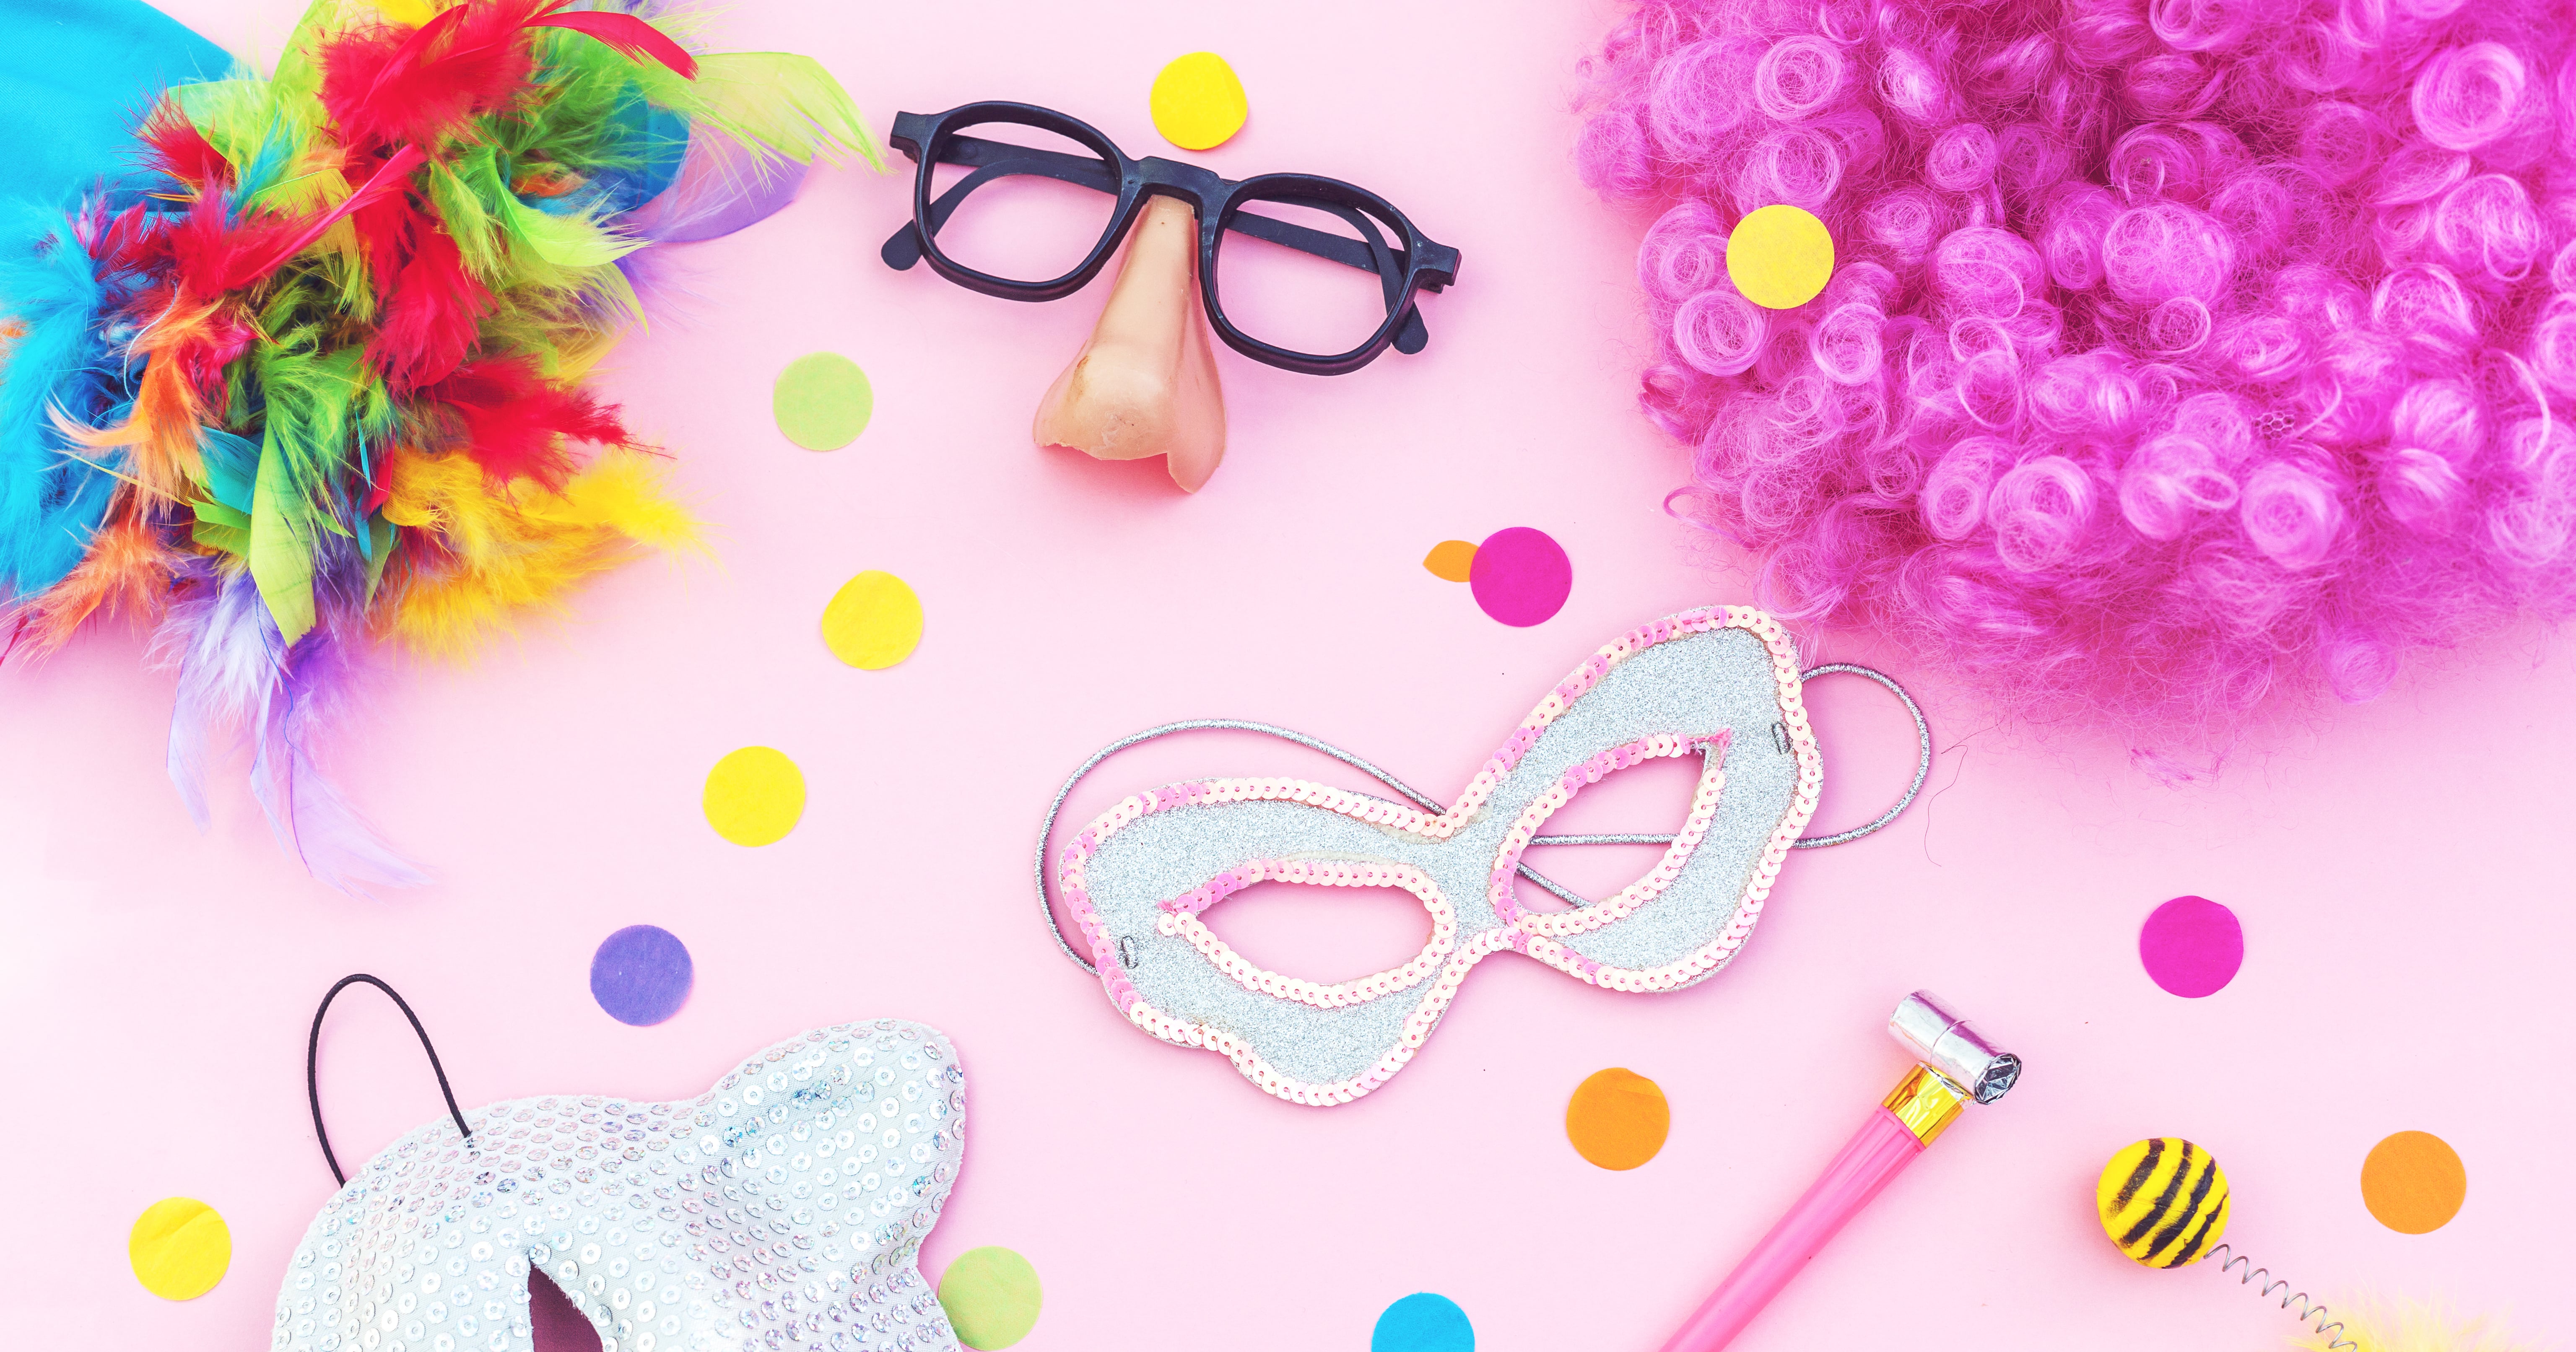 Break Out Your Neon & Spandex for These 80s Theme Party Ideas